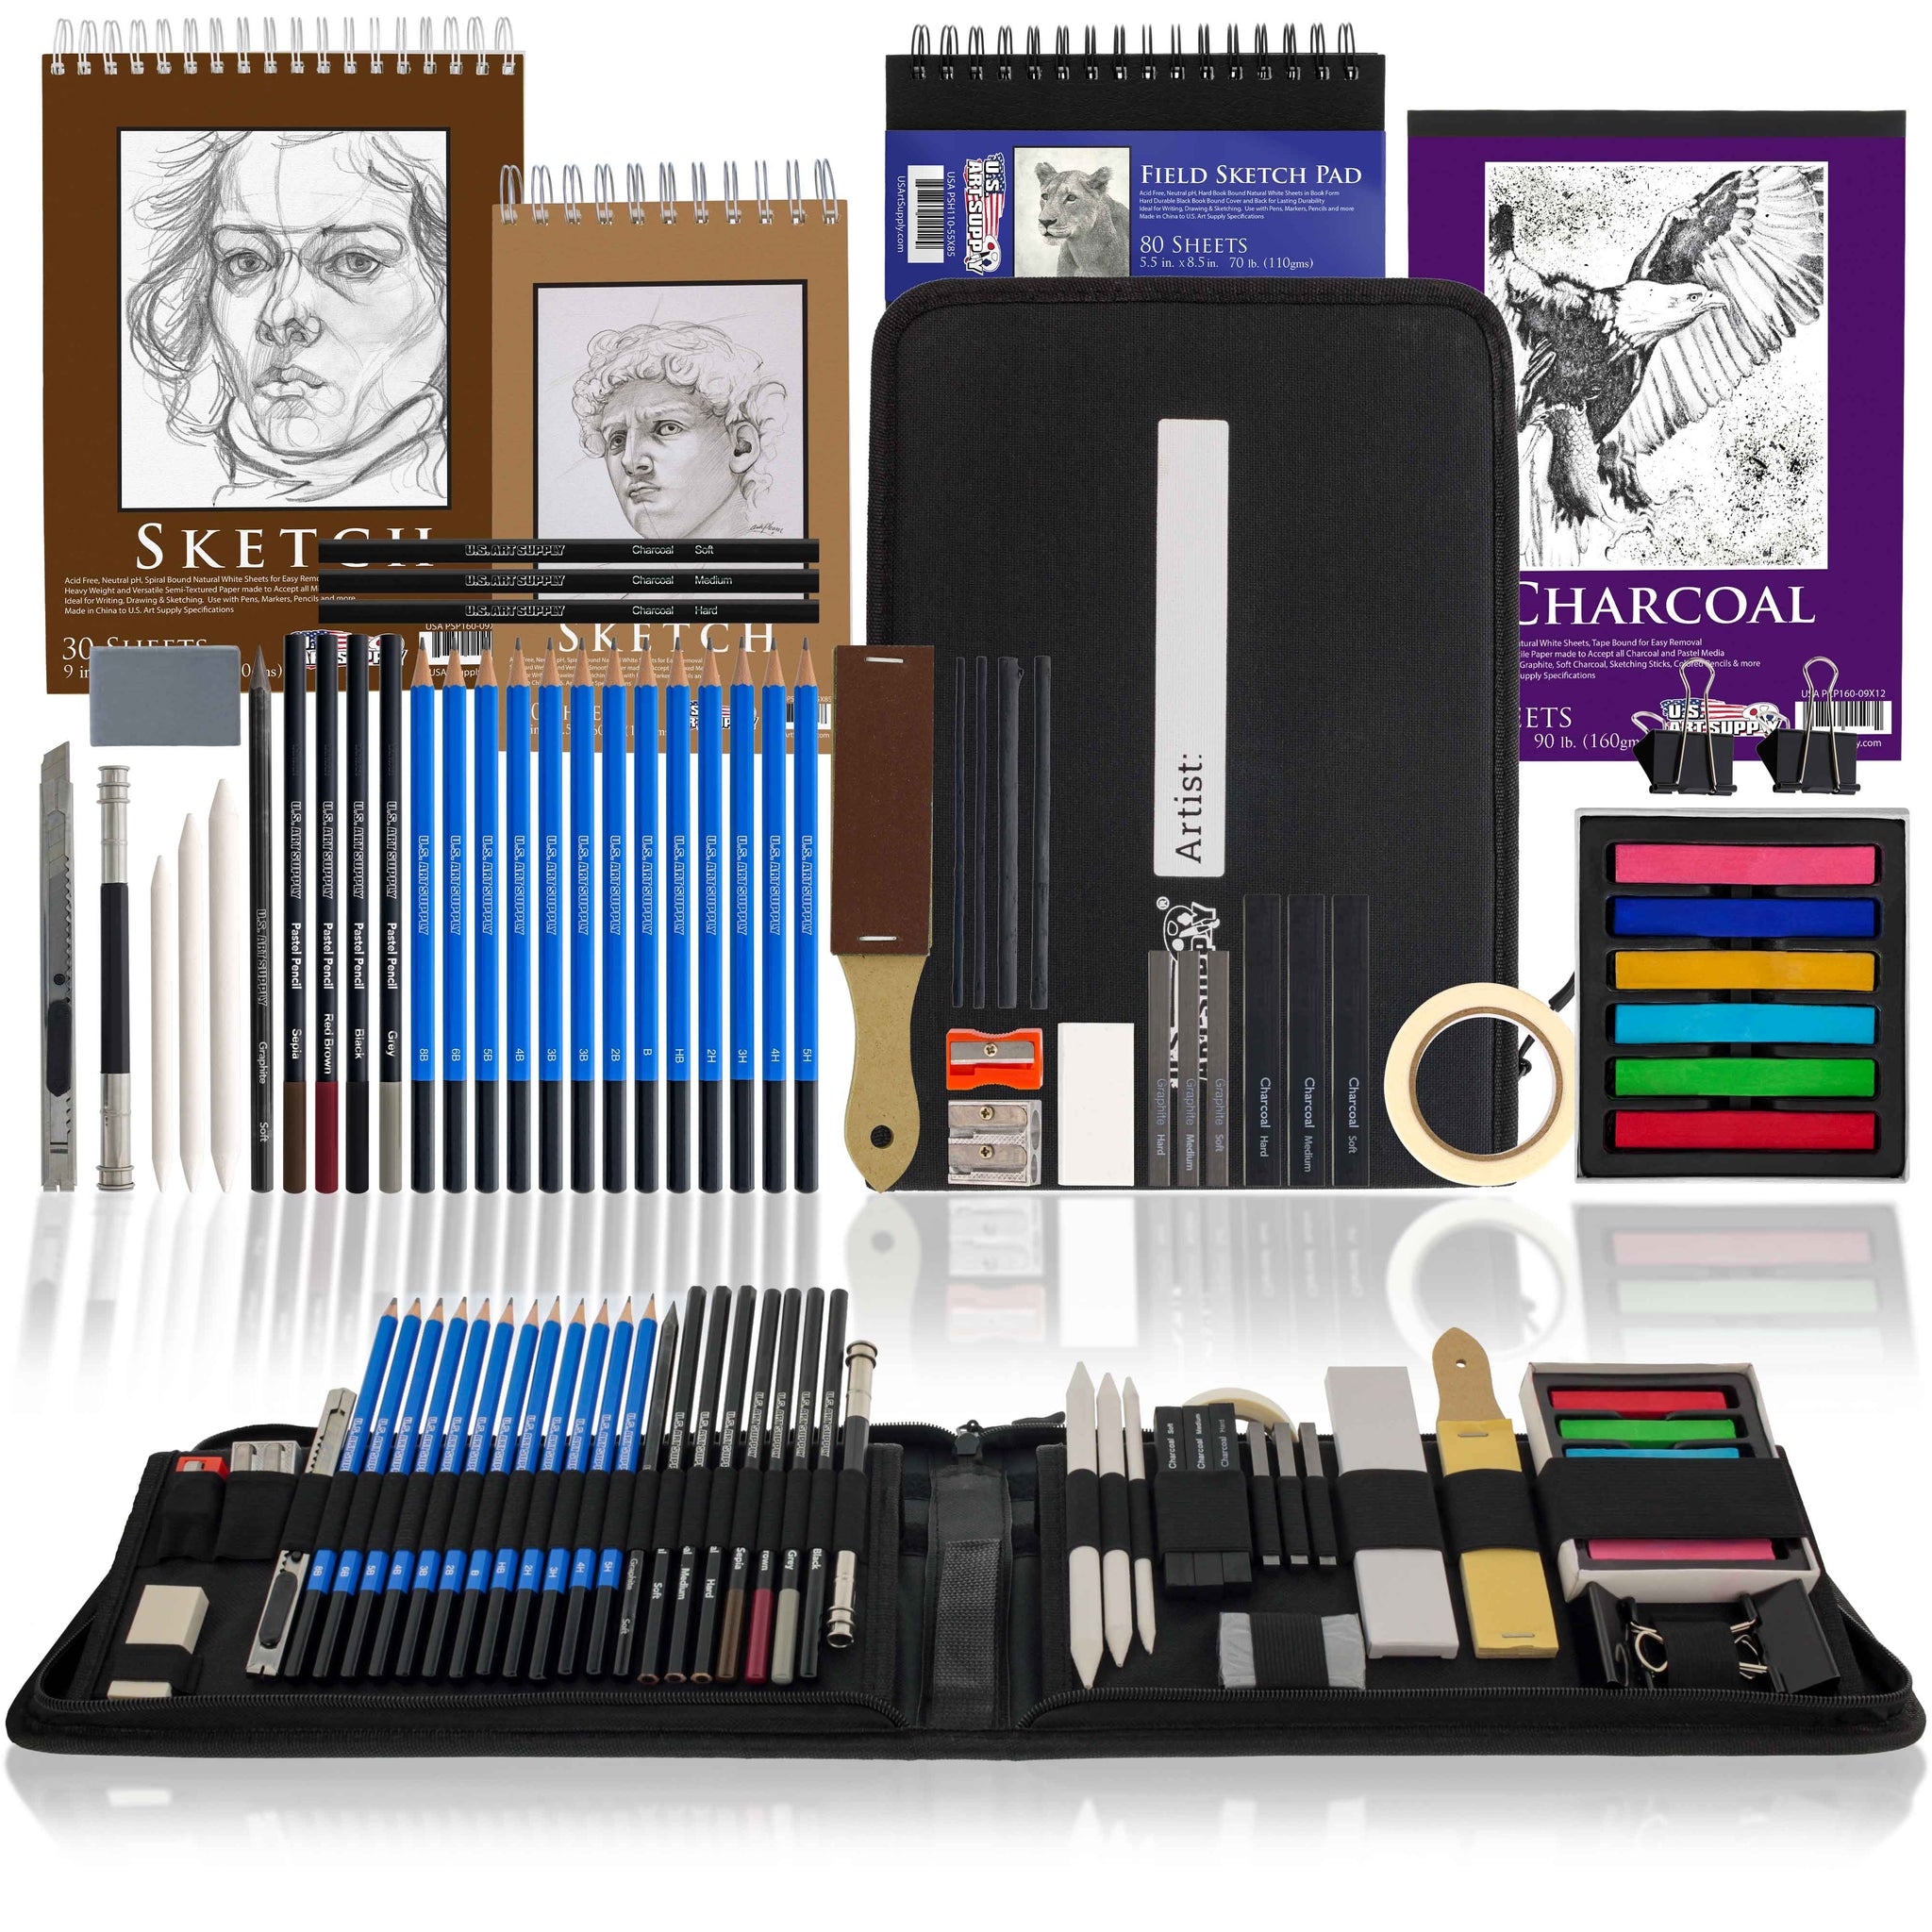 54-Piece Drawing & Sketching Art Set with 4 Sketch Pads - Ultimate Artist Kit, Graphite and Charcoal Pencils & Sticks, Pastels, Case